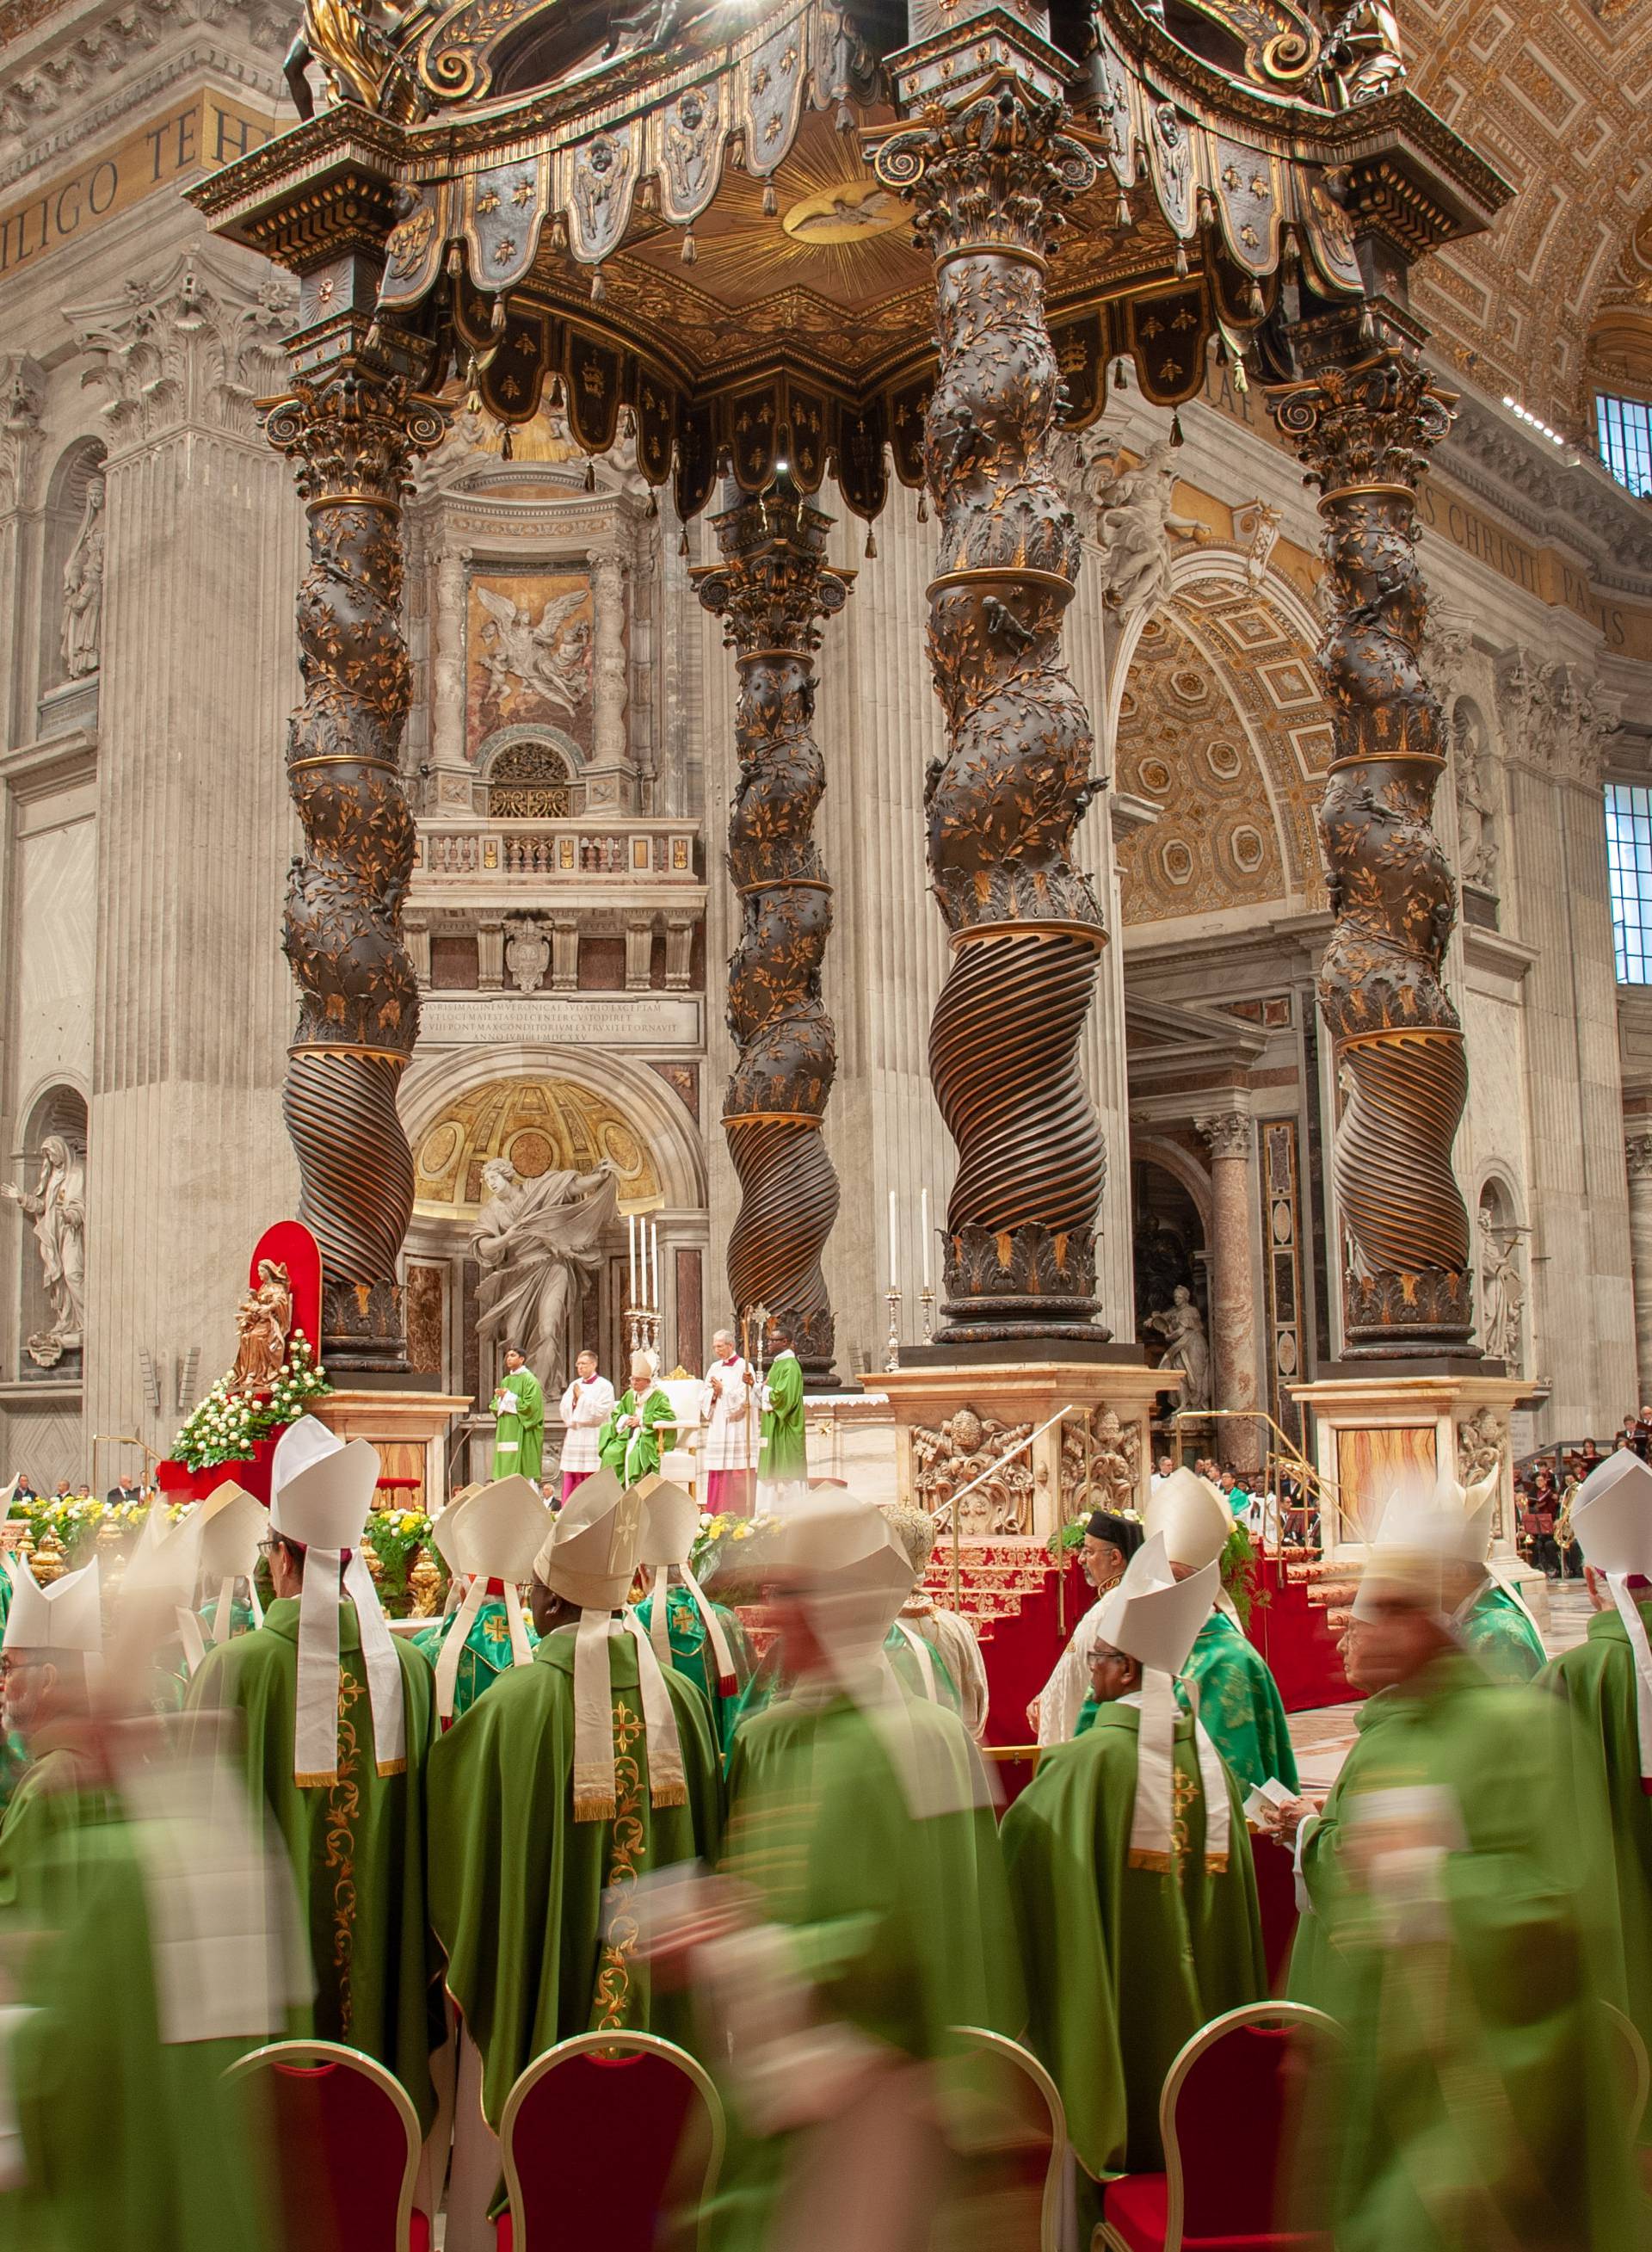 October 28, 2018 : Mass at the conclusion of the XV General Assembly of the Synod of Bishops in St. Peter's Basilica in the Vatican.